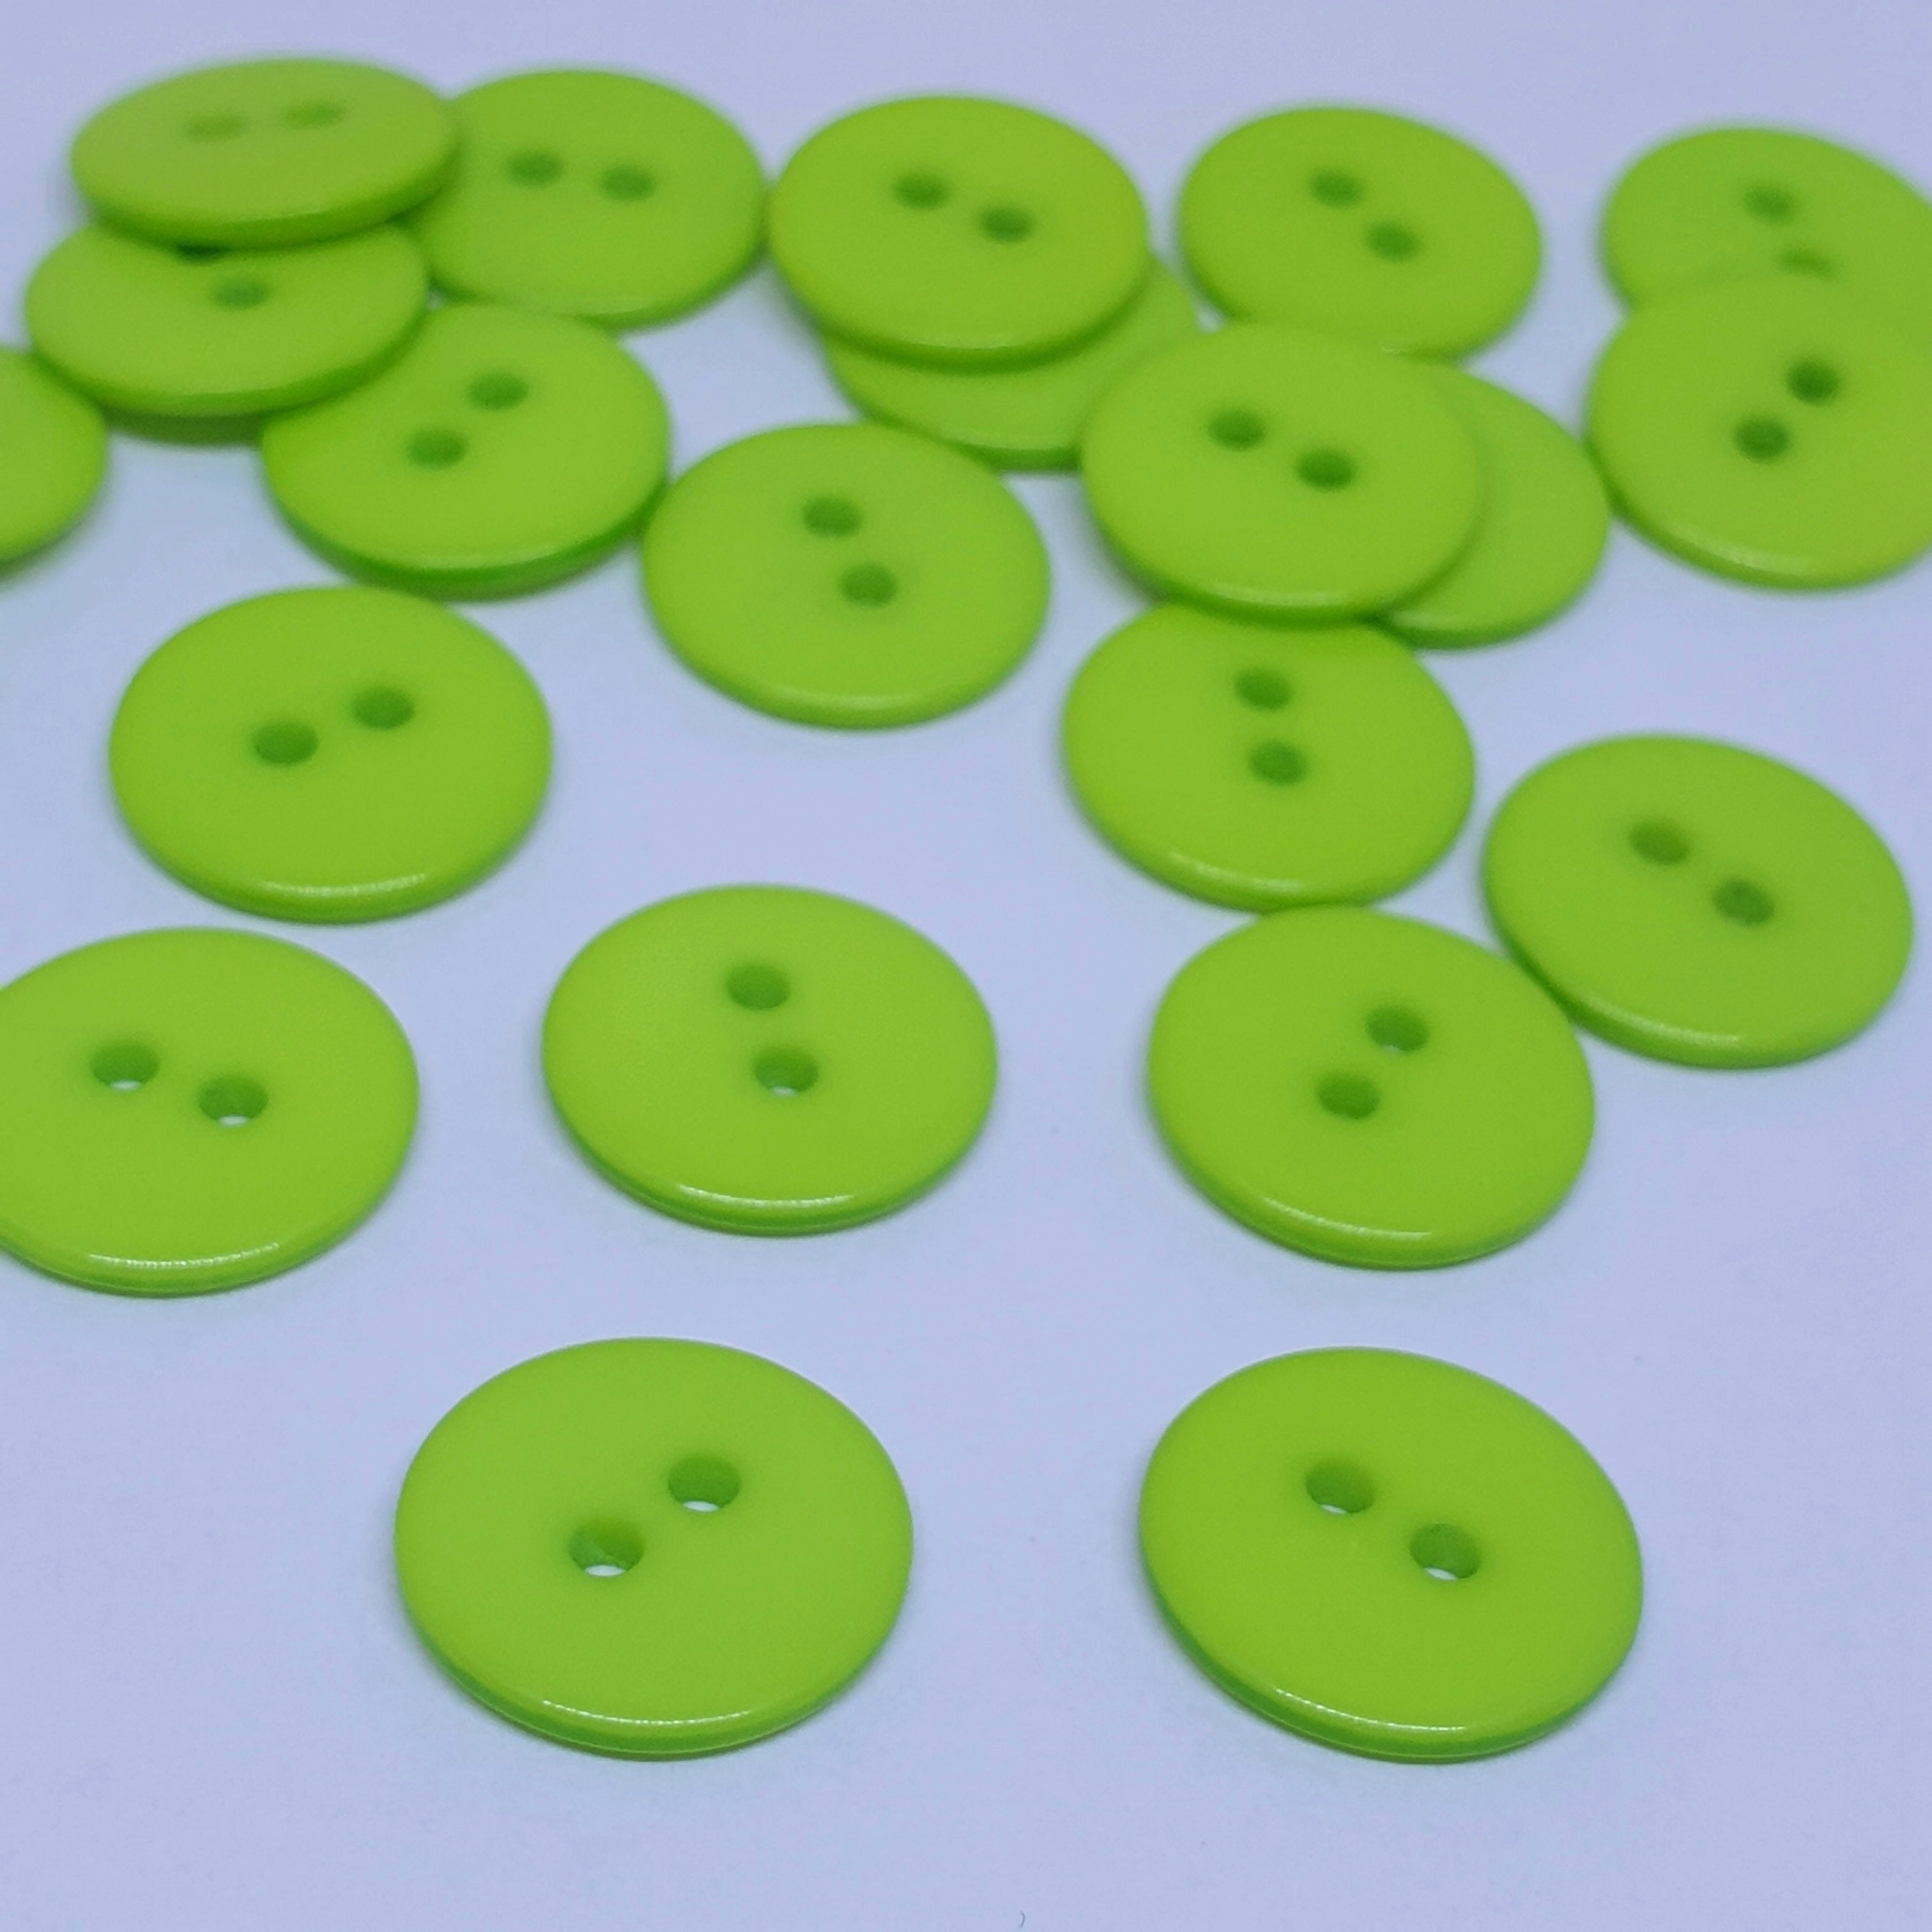 MajorCrafts 72pcs 15mm Apple Green 2 Holes Round Resin Sewing Buttons